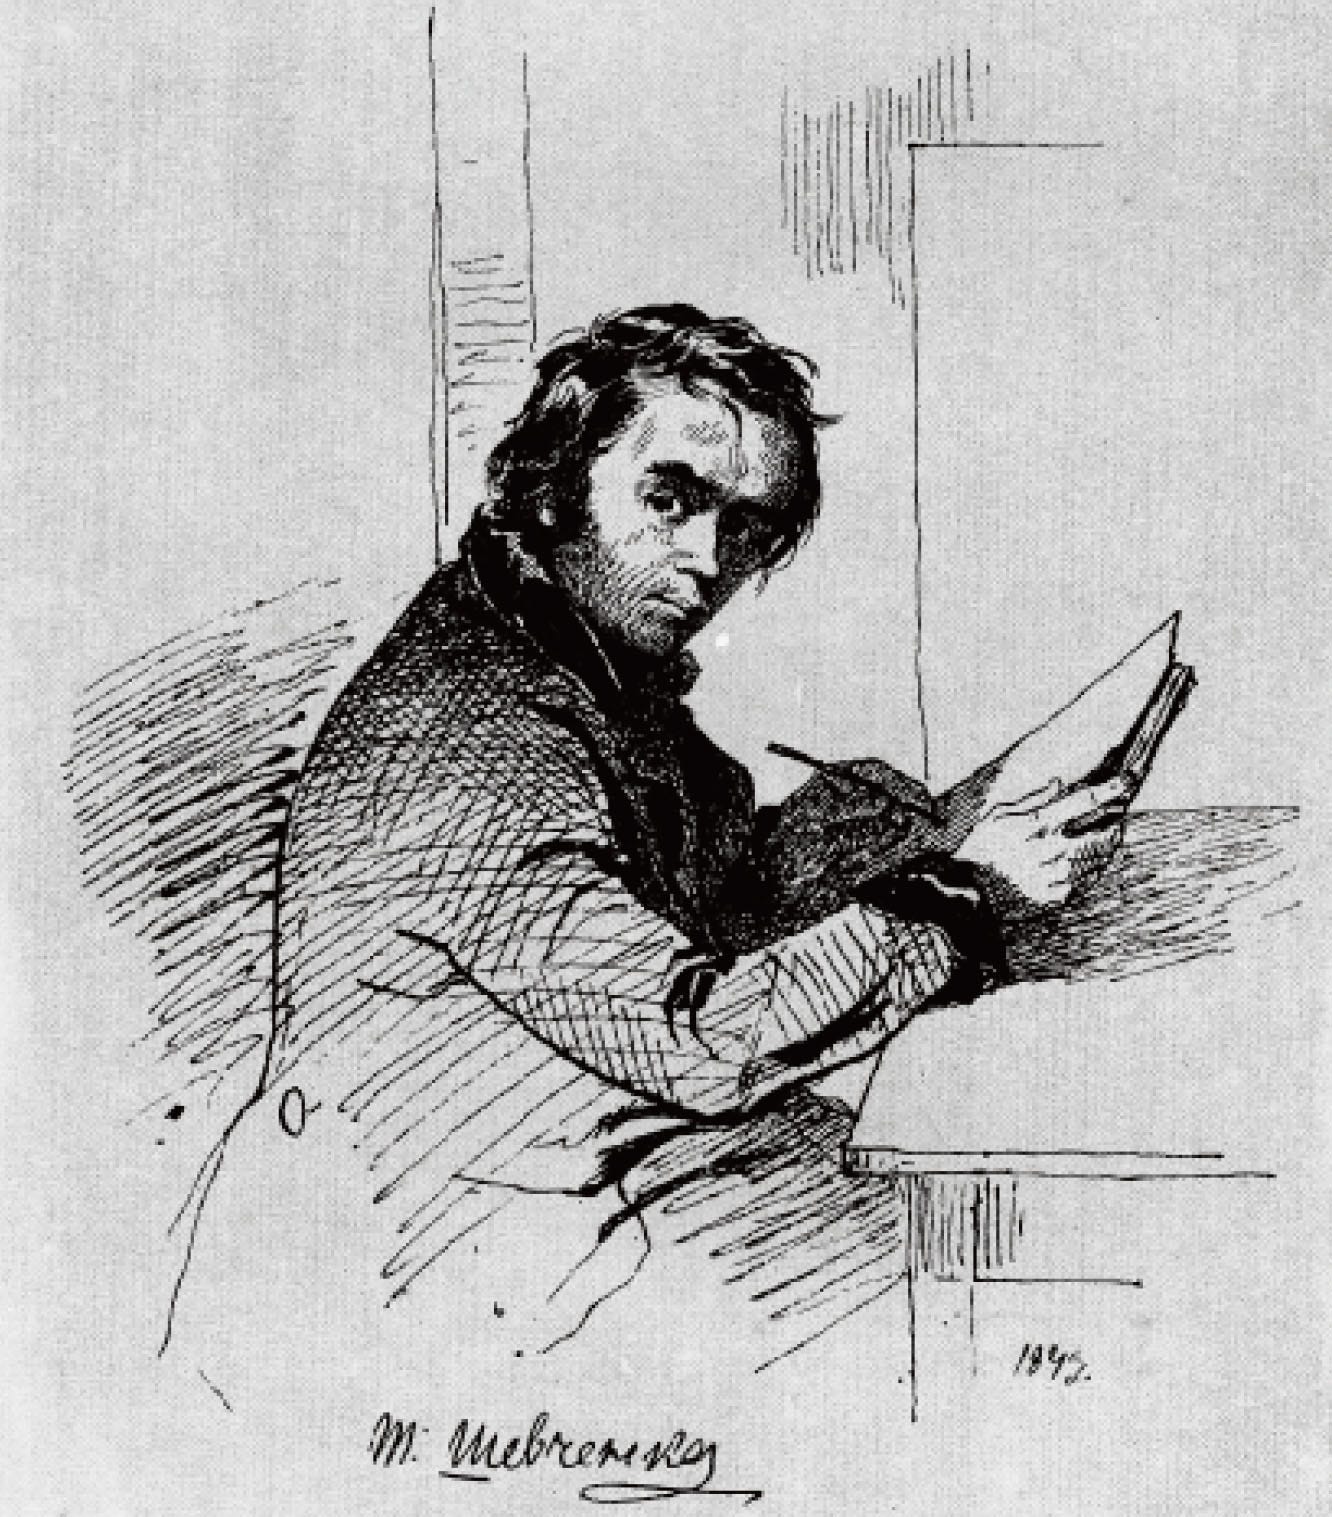 The Self-Portraits of Taras Shevchenko An Attempt at a Typology